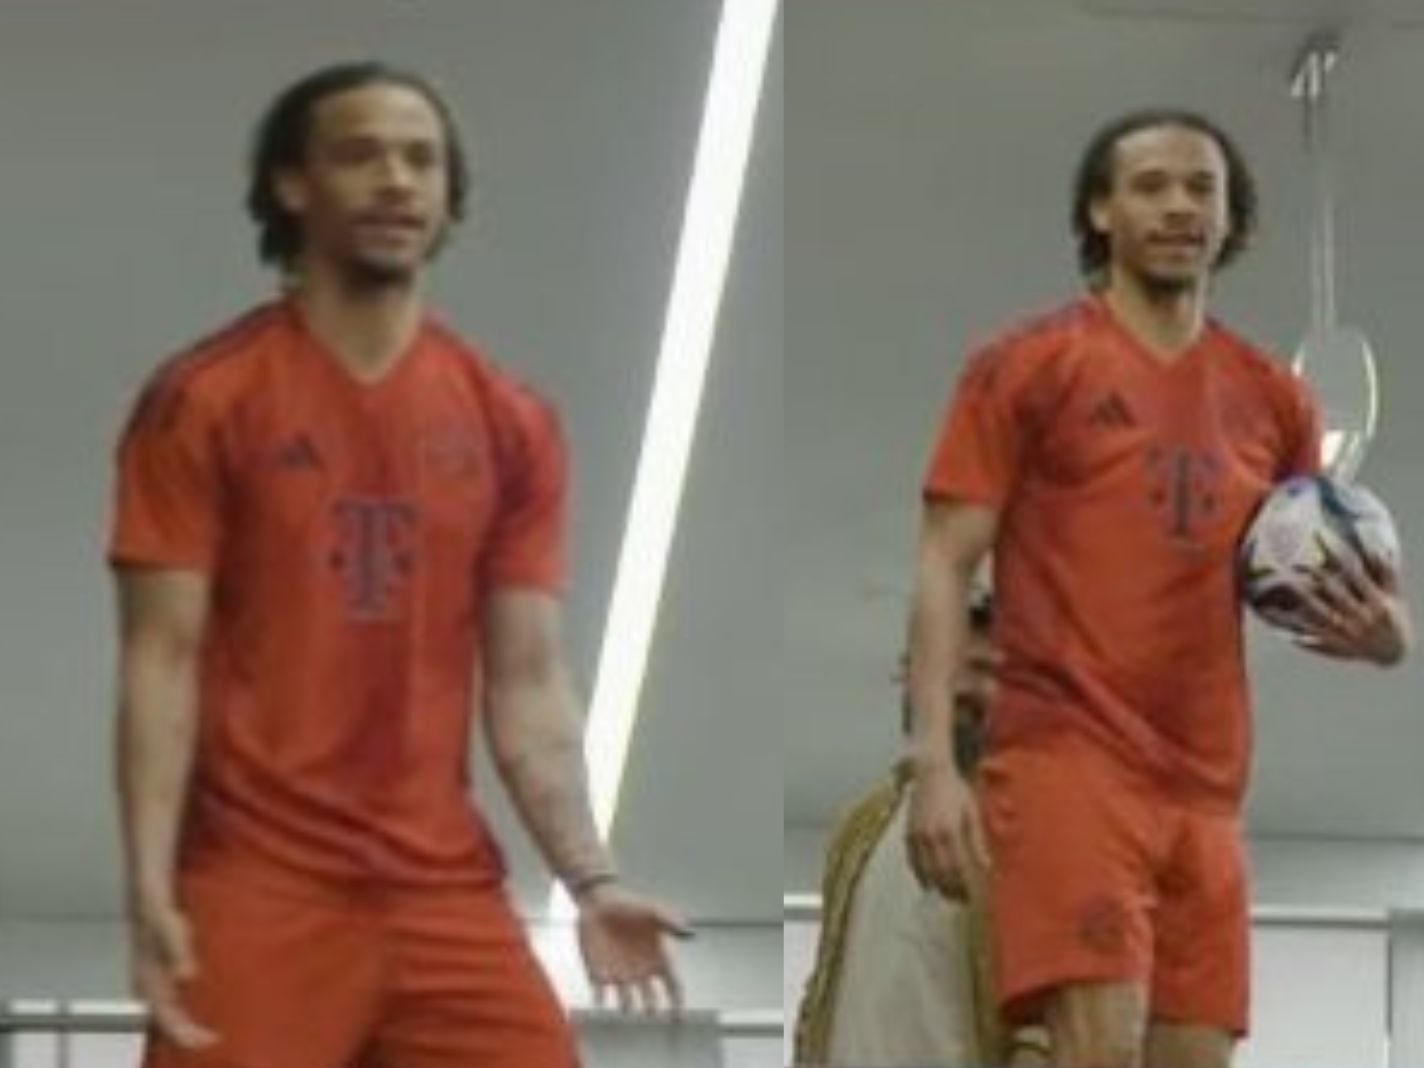 Leaked Bayern Munich Home Kit for 24/25 Season in Spotlight for Looking More Orange Than Red